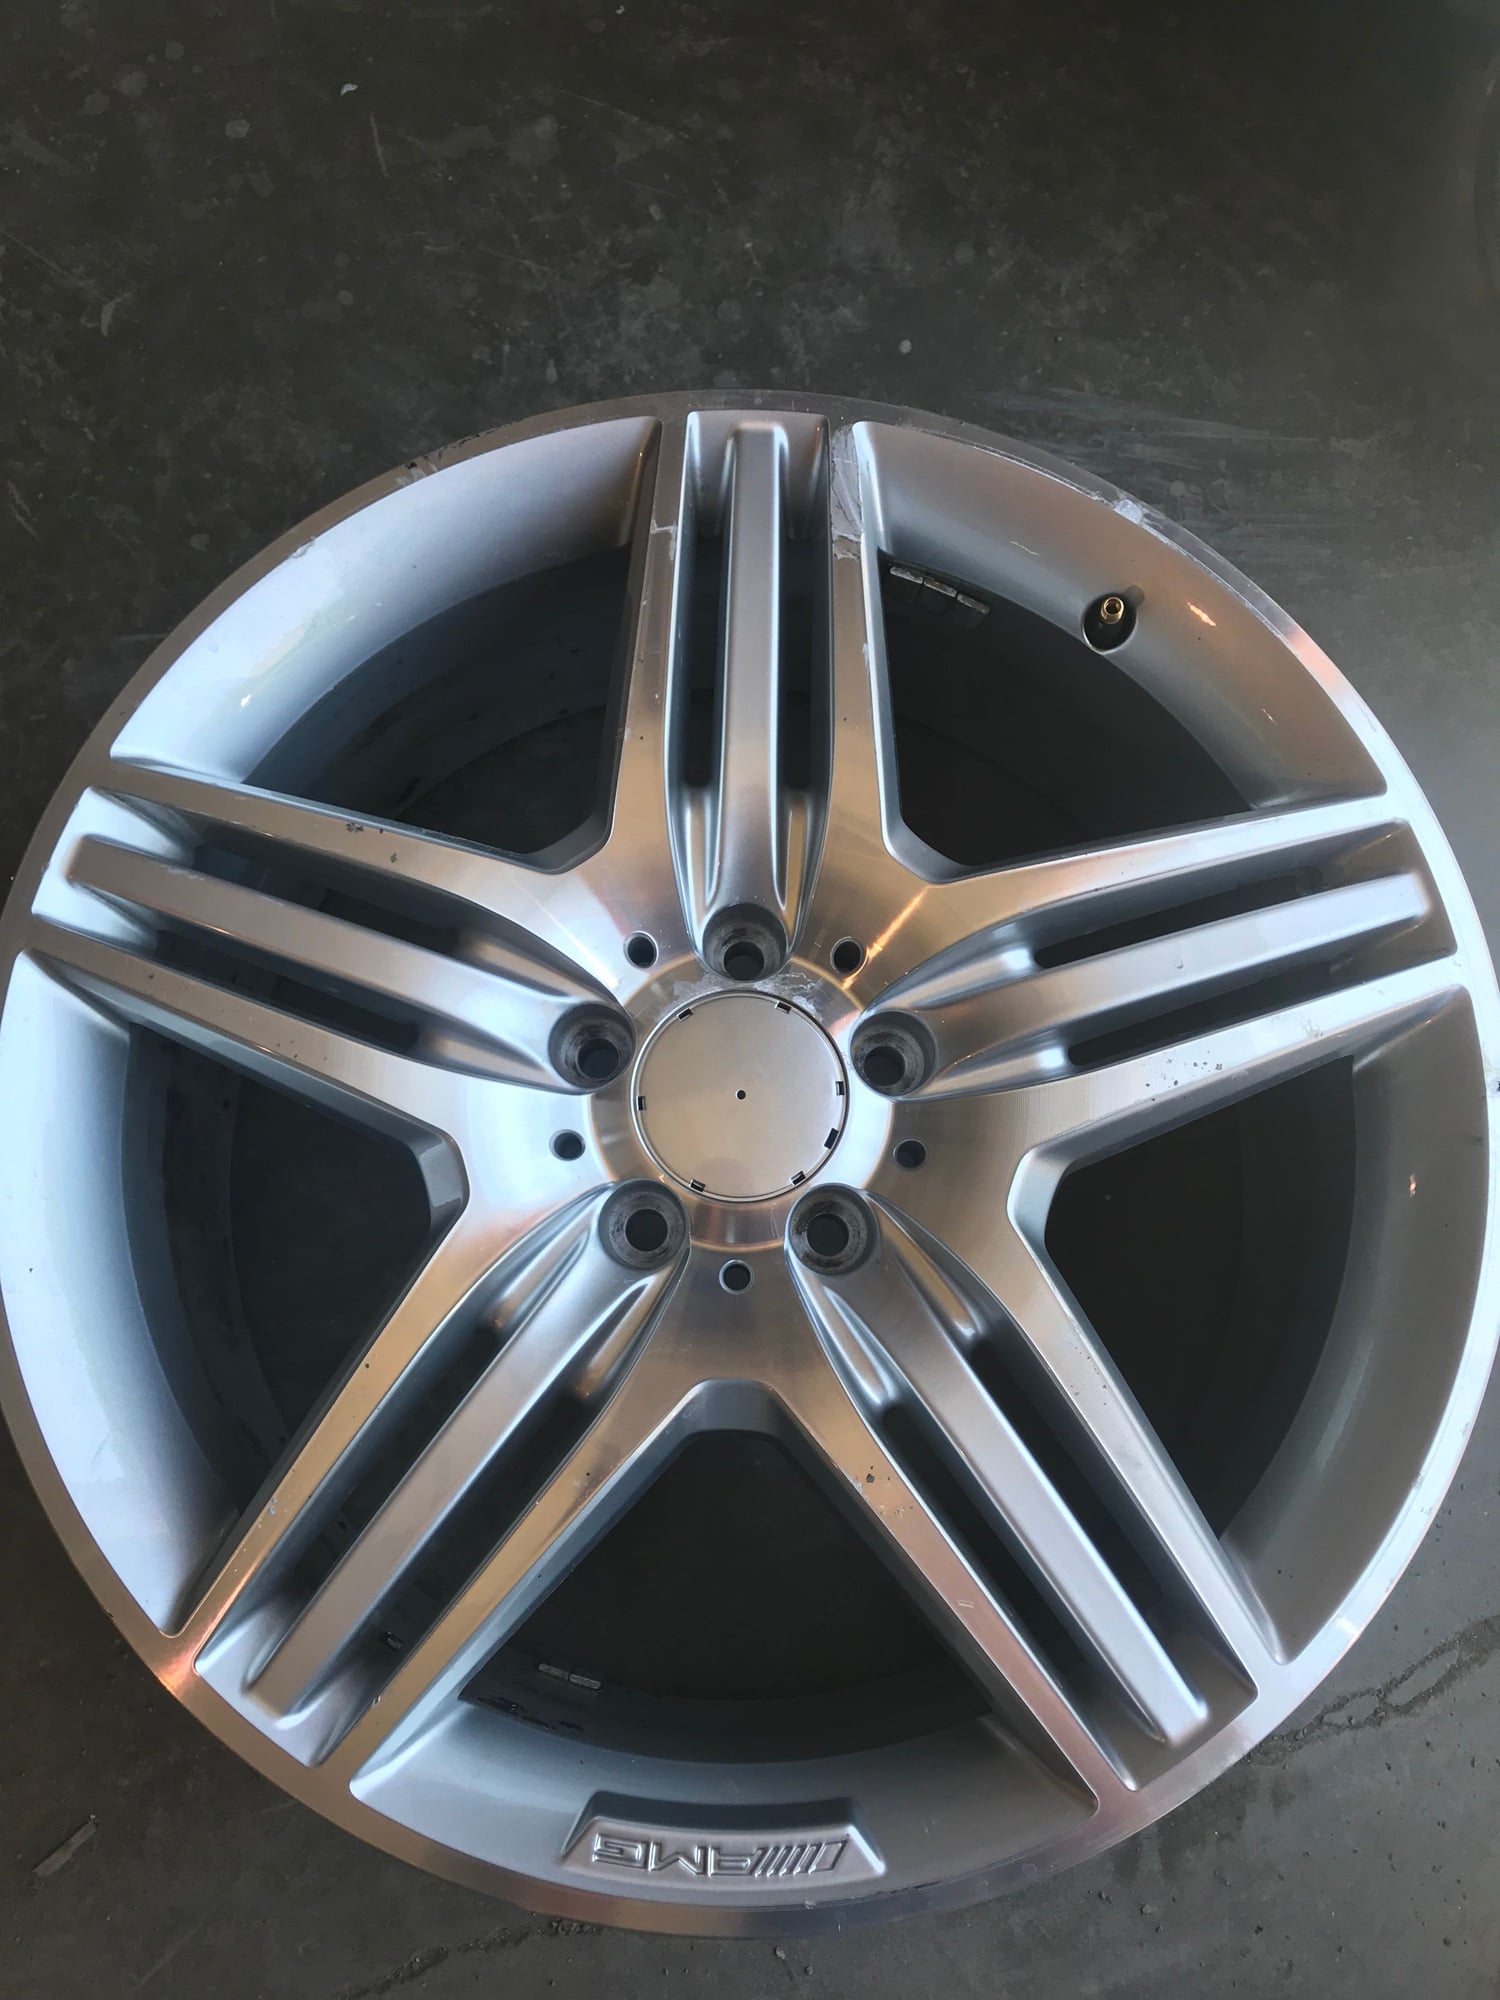 Wheels and Tires/Axles - AMG wheels for S-Class - Used - 2014 to 2019 Mercedes-Benz S550 - Greensboro, NC 27407, United States